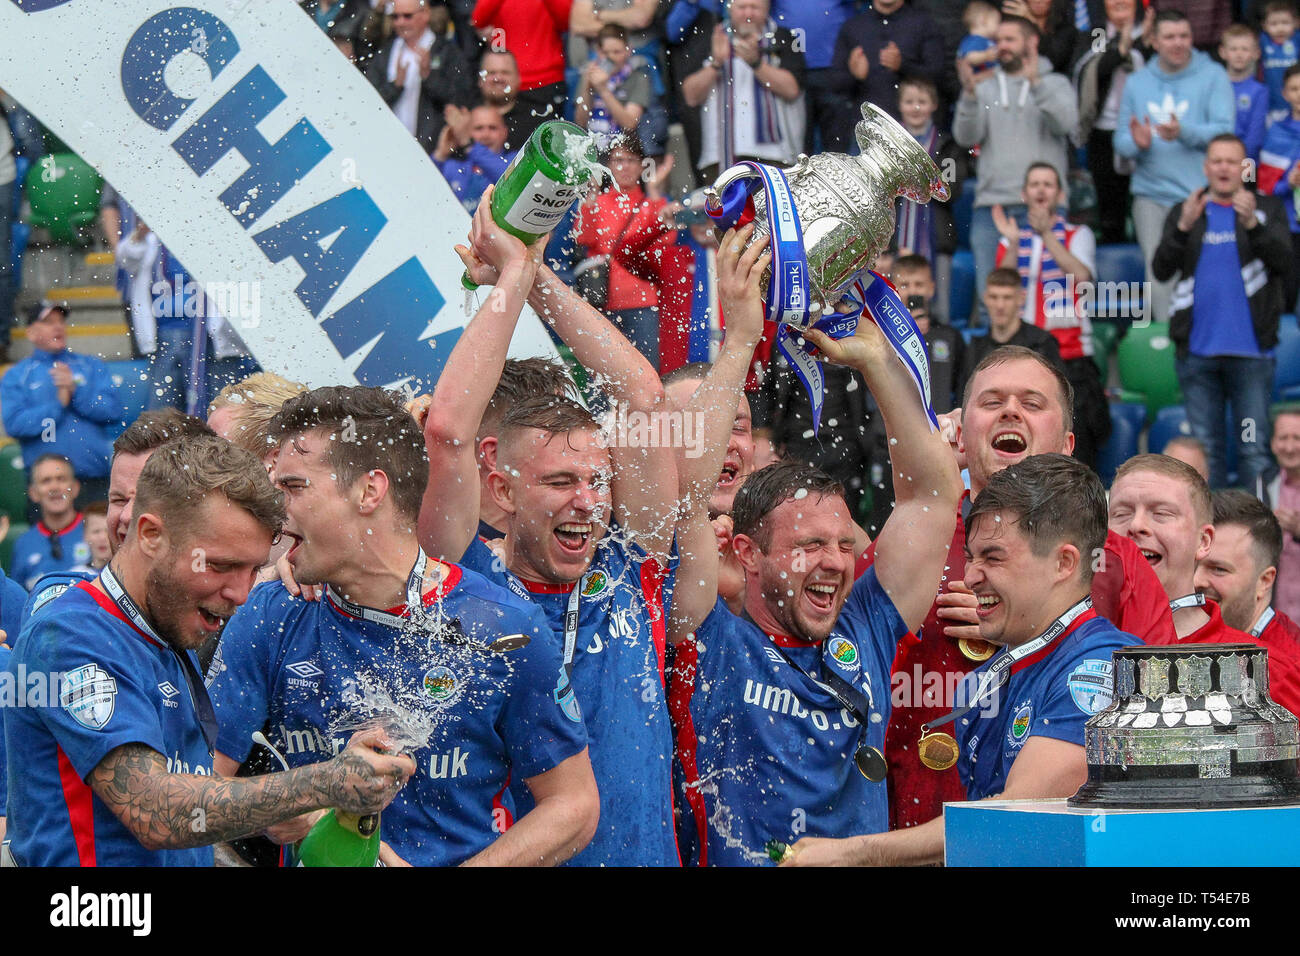 Windsor Park, Belfast, Northern Ireland, UK. 20th Apr, 2019. Linfield, confirmed as Danske Bank Premiership champions last Saturday, lifted the league trophy today after their home league game against Glenavon. The Belfast side, managed by former Northern Ireland international David Healy, have now won the Irish League title on 53 occasions. Linfield captain Jamie Mulgrew lifts the leagues winners trophy - The Gibson Cup - for Linfield. Credit: CAZIMB/Alamy Live News. Stock Photo